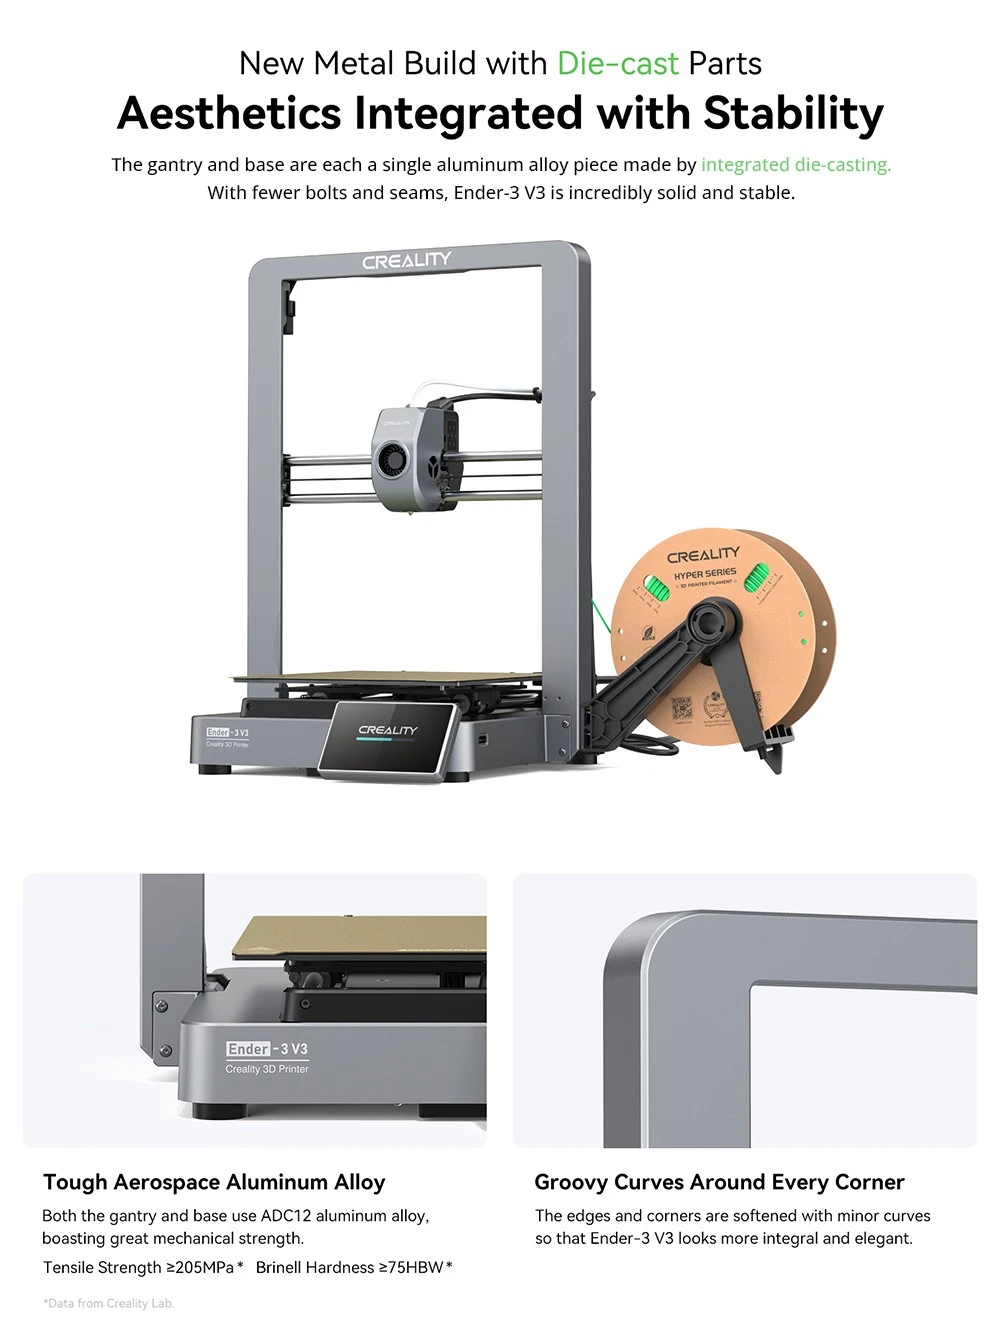 Creality Ender-3 V3 3D Printer, Auto-Leveling, 600mm/s Max Printing Speed, 0.2mm Printing Accuracy, Dual-Gear Direct Extruder, Input Shaping, Color Touch Screen, WiFi Connection, 220x220x250mm